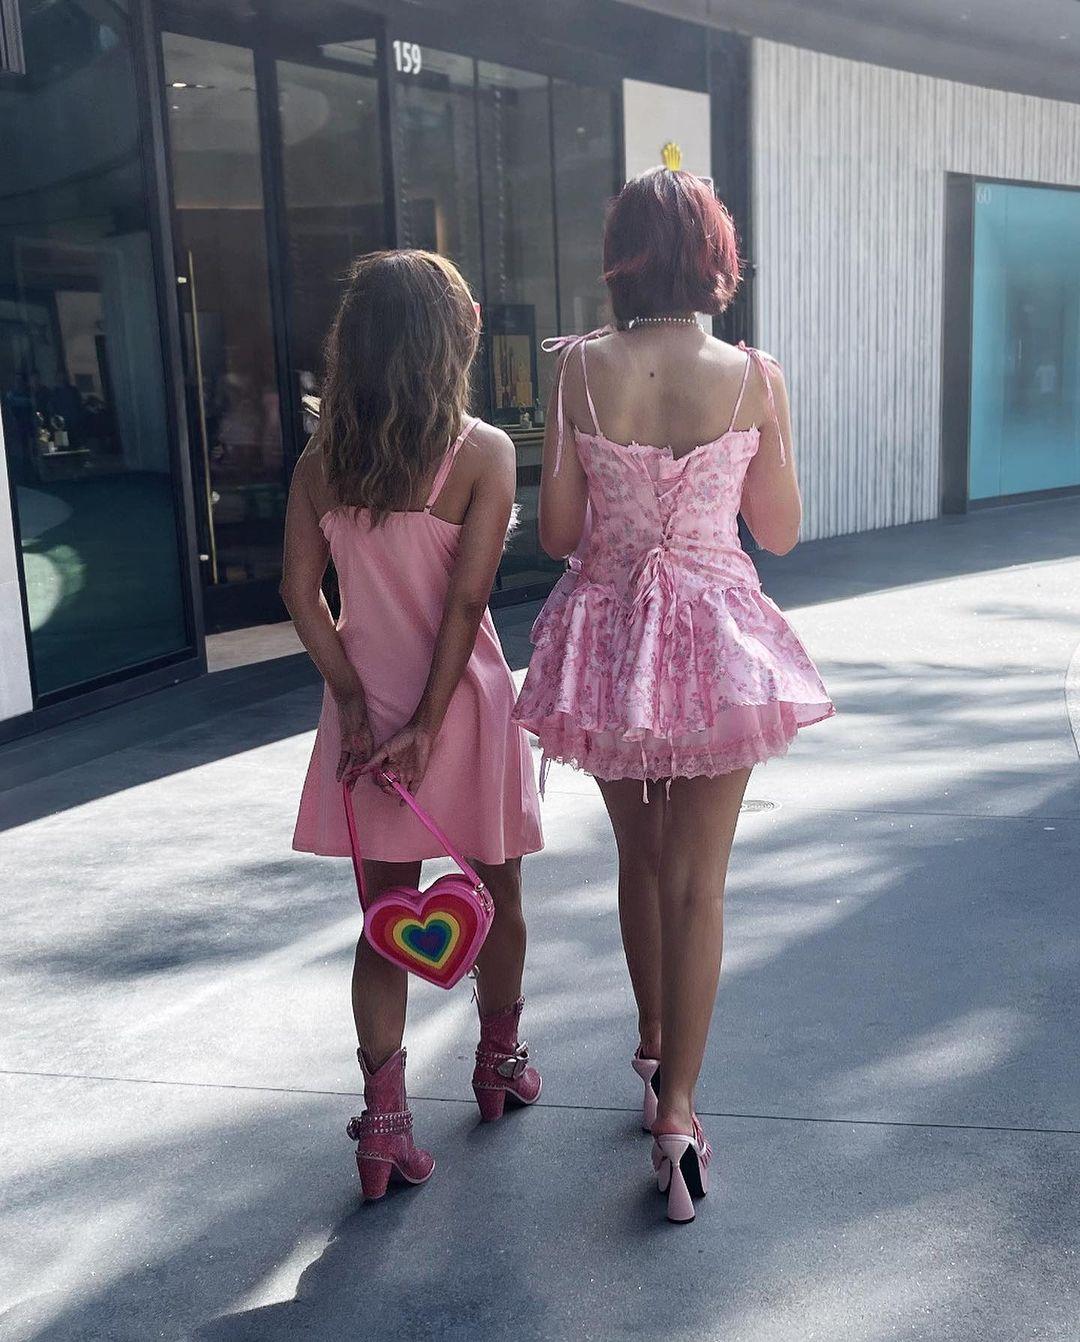 Fans Shocked At How Tall Halle Berry's 15-Year-Old Daughter Is In Rare Snap